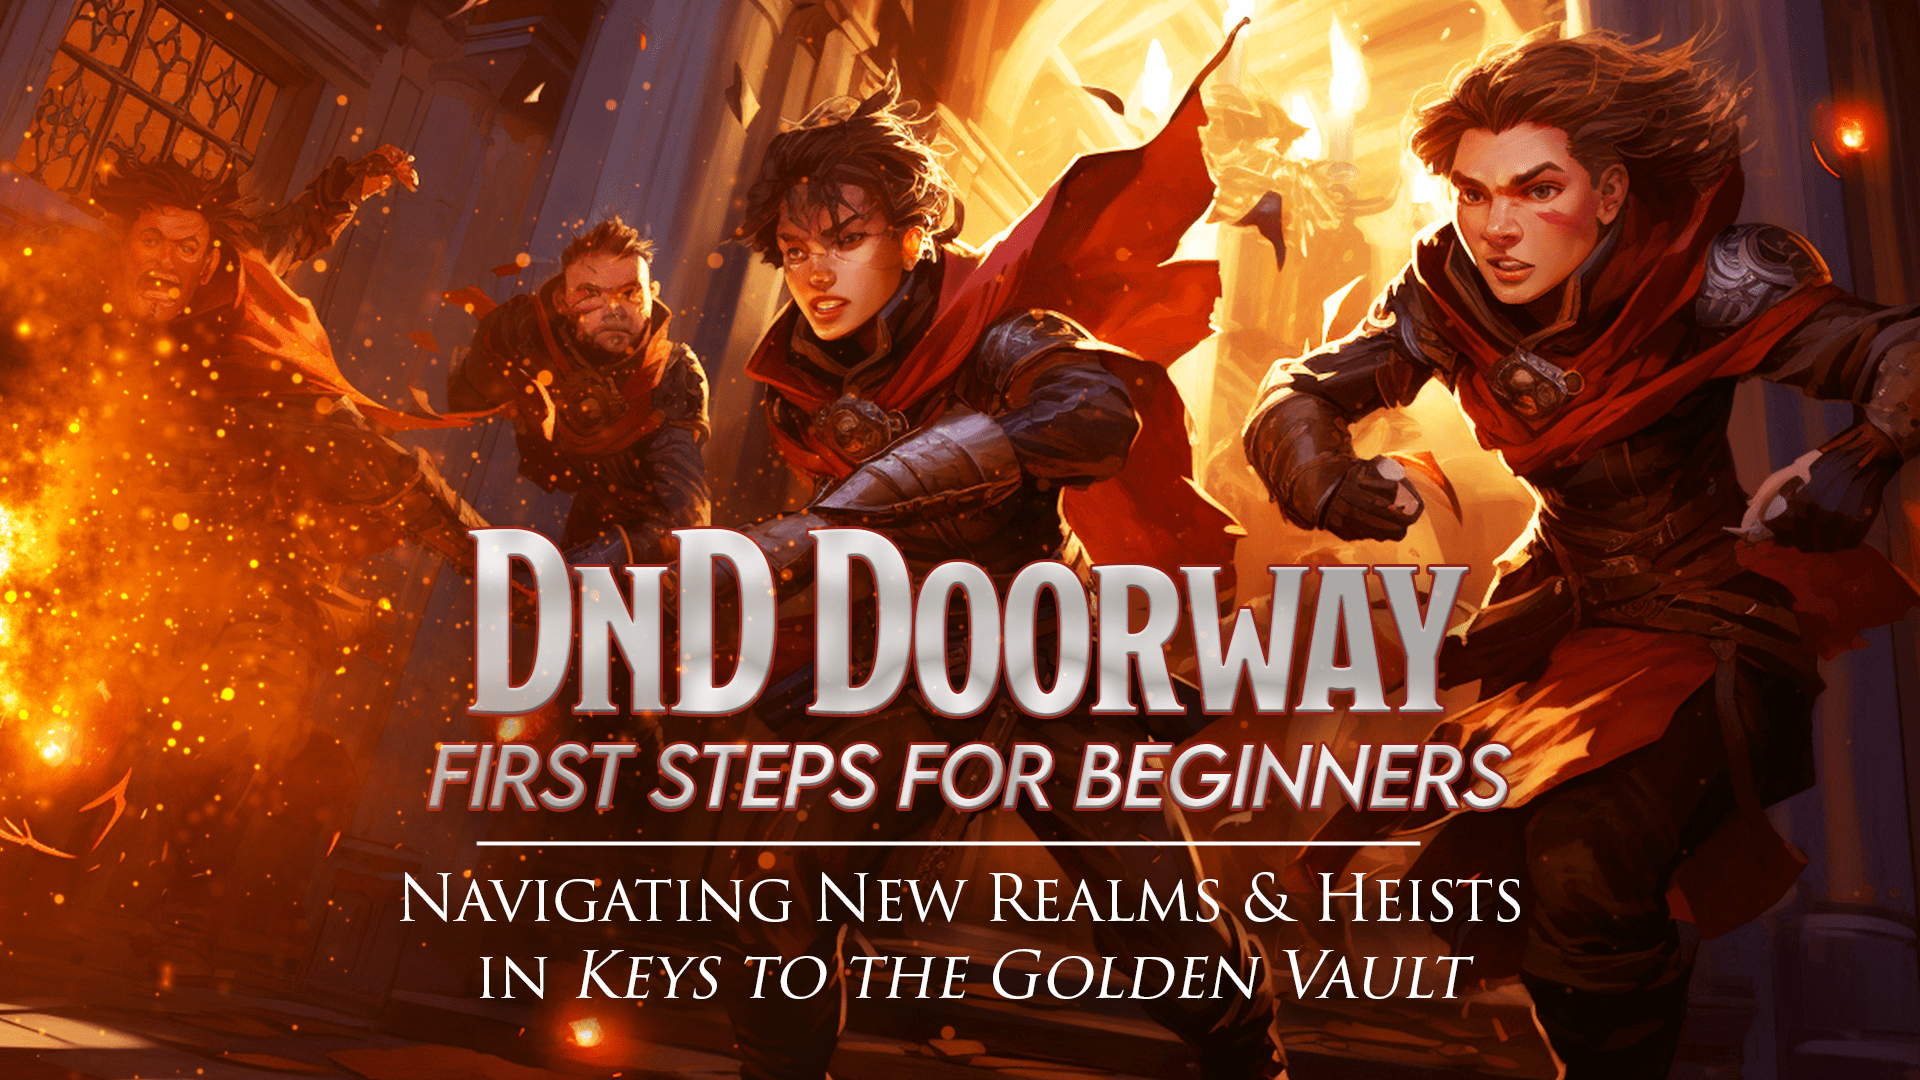 DnD Doorway: First Steps for Beginners / Navigating New Realms and Heists in 'Keys to the Golden Vault' 